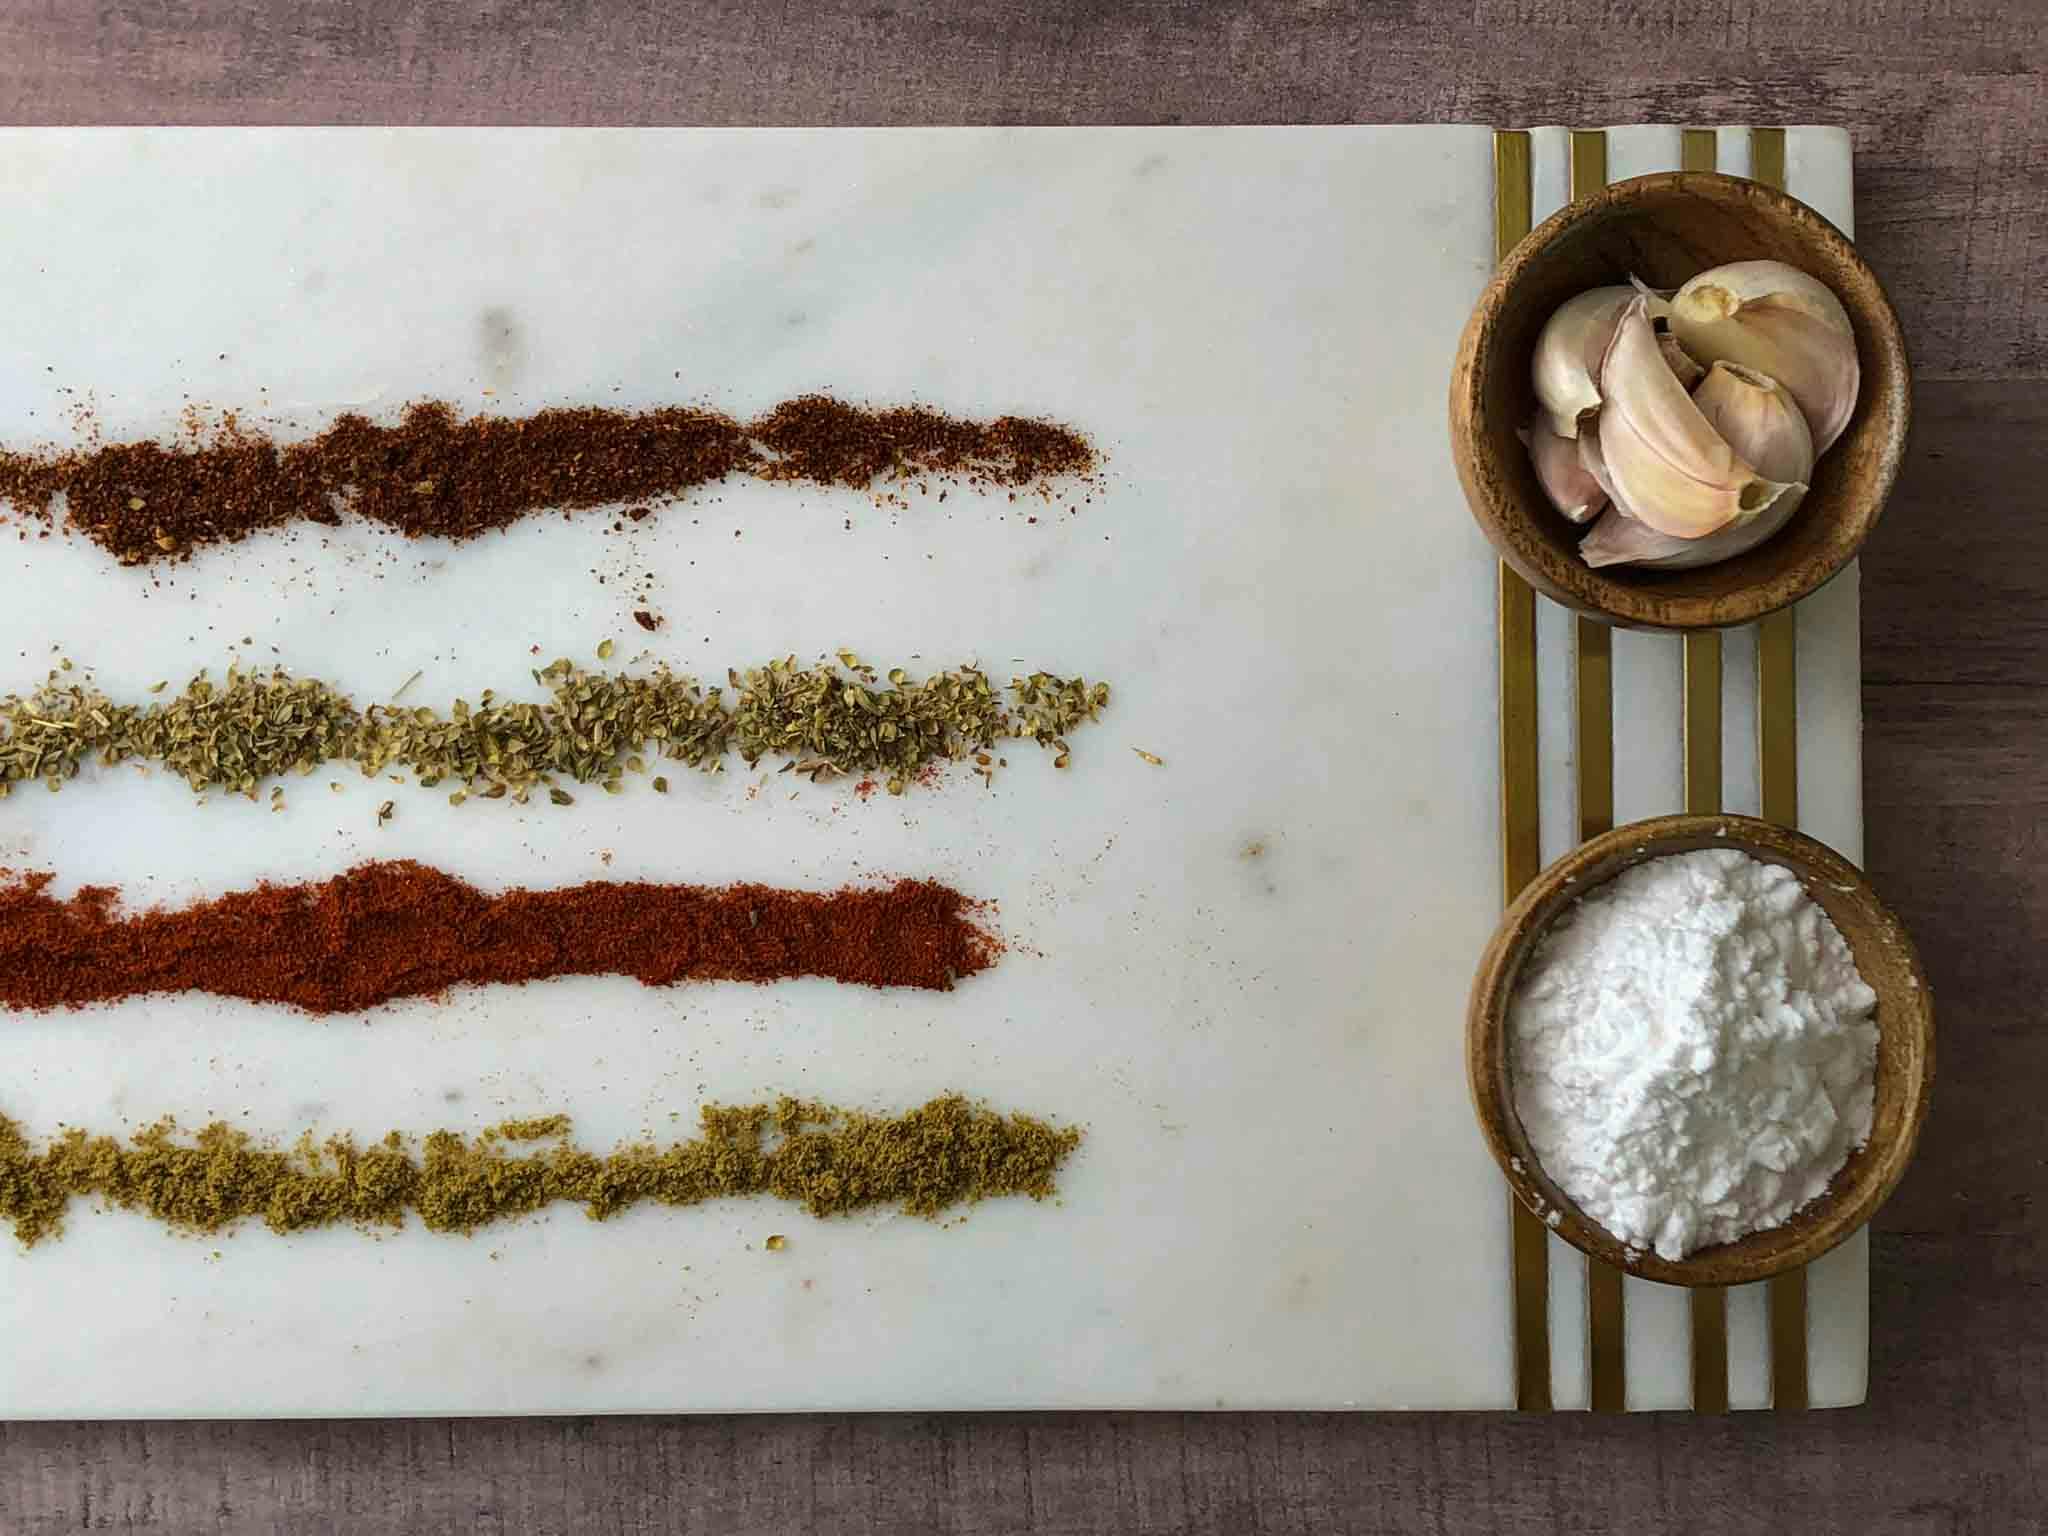 All spices on a serving platter in lines.